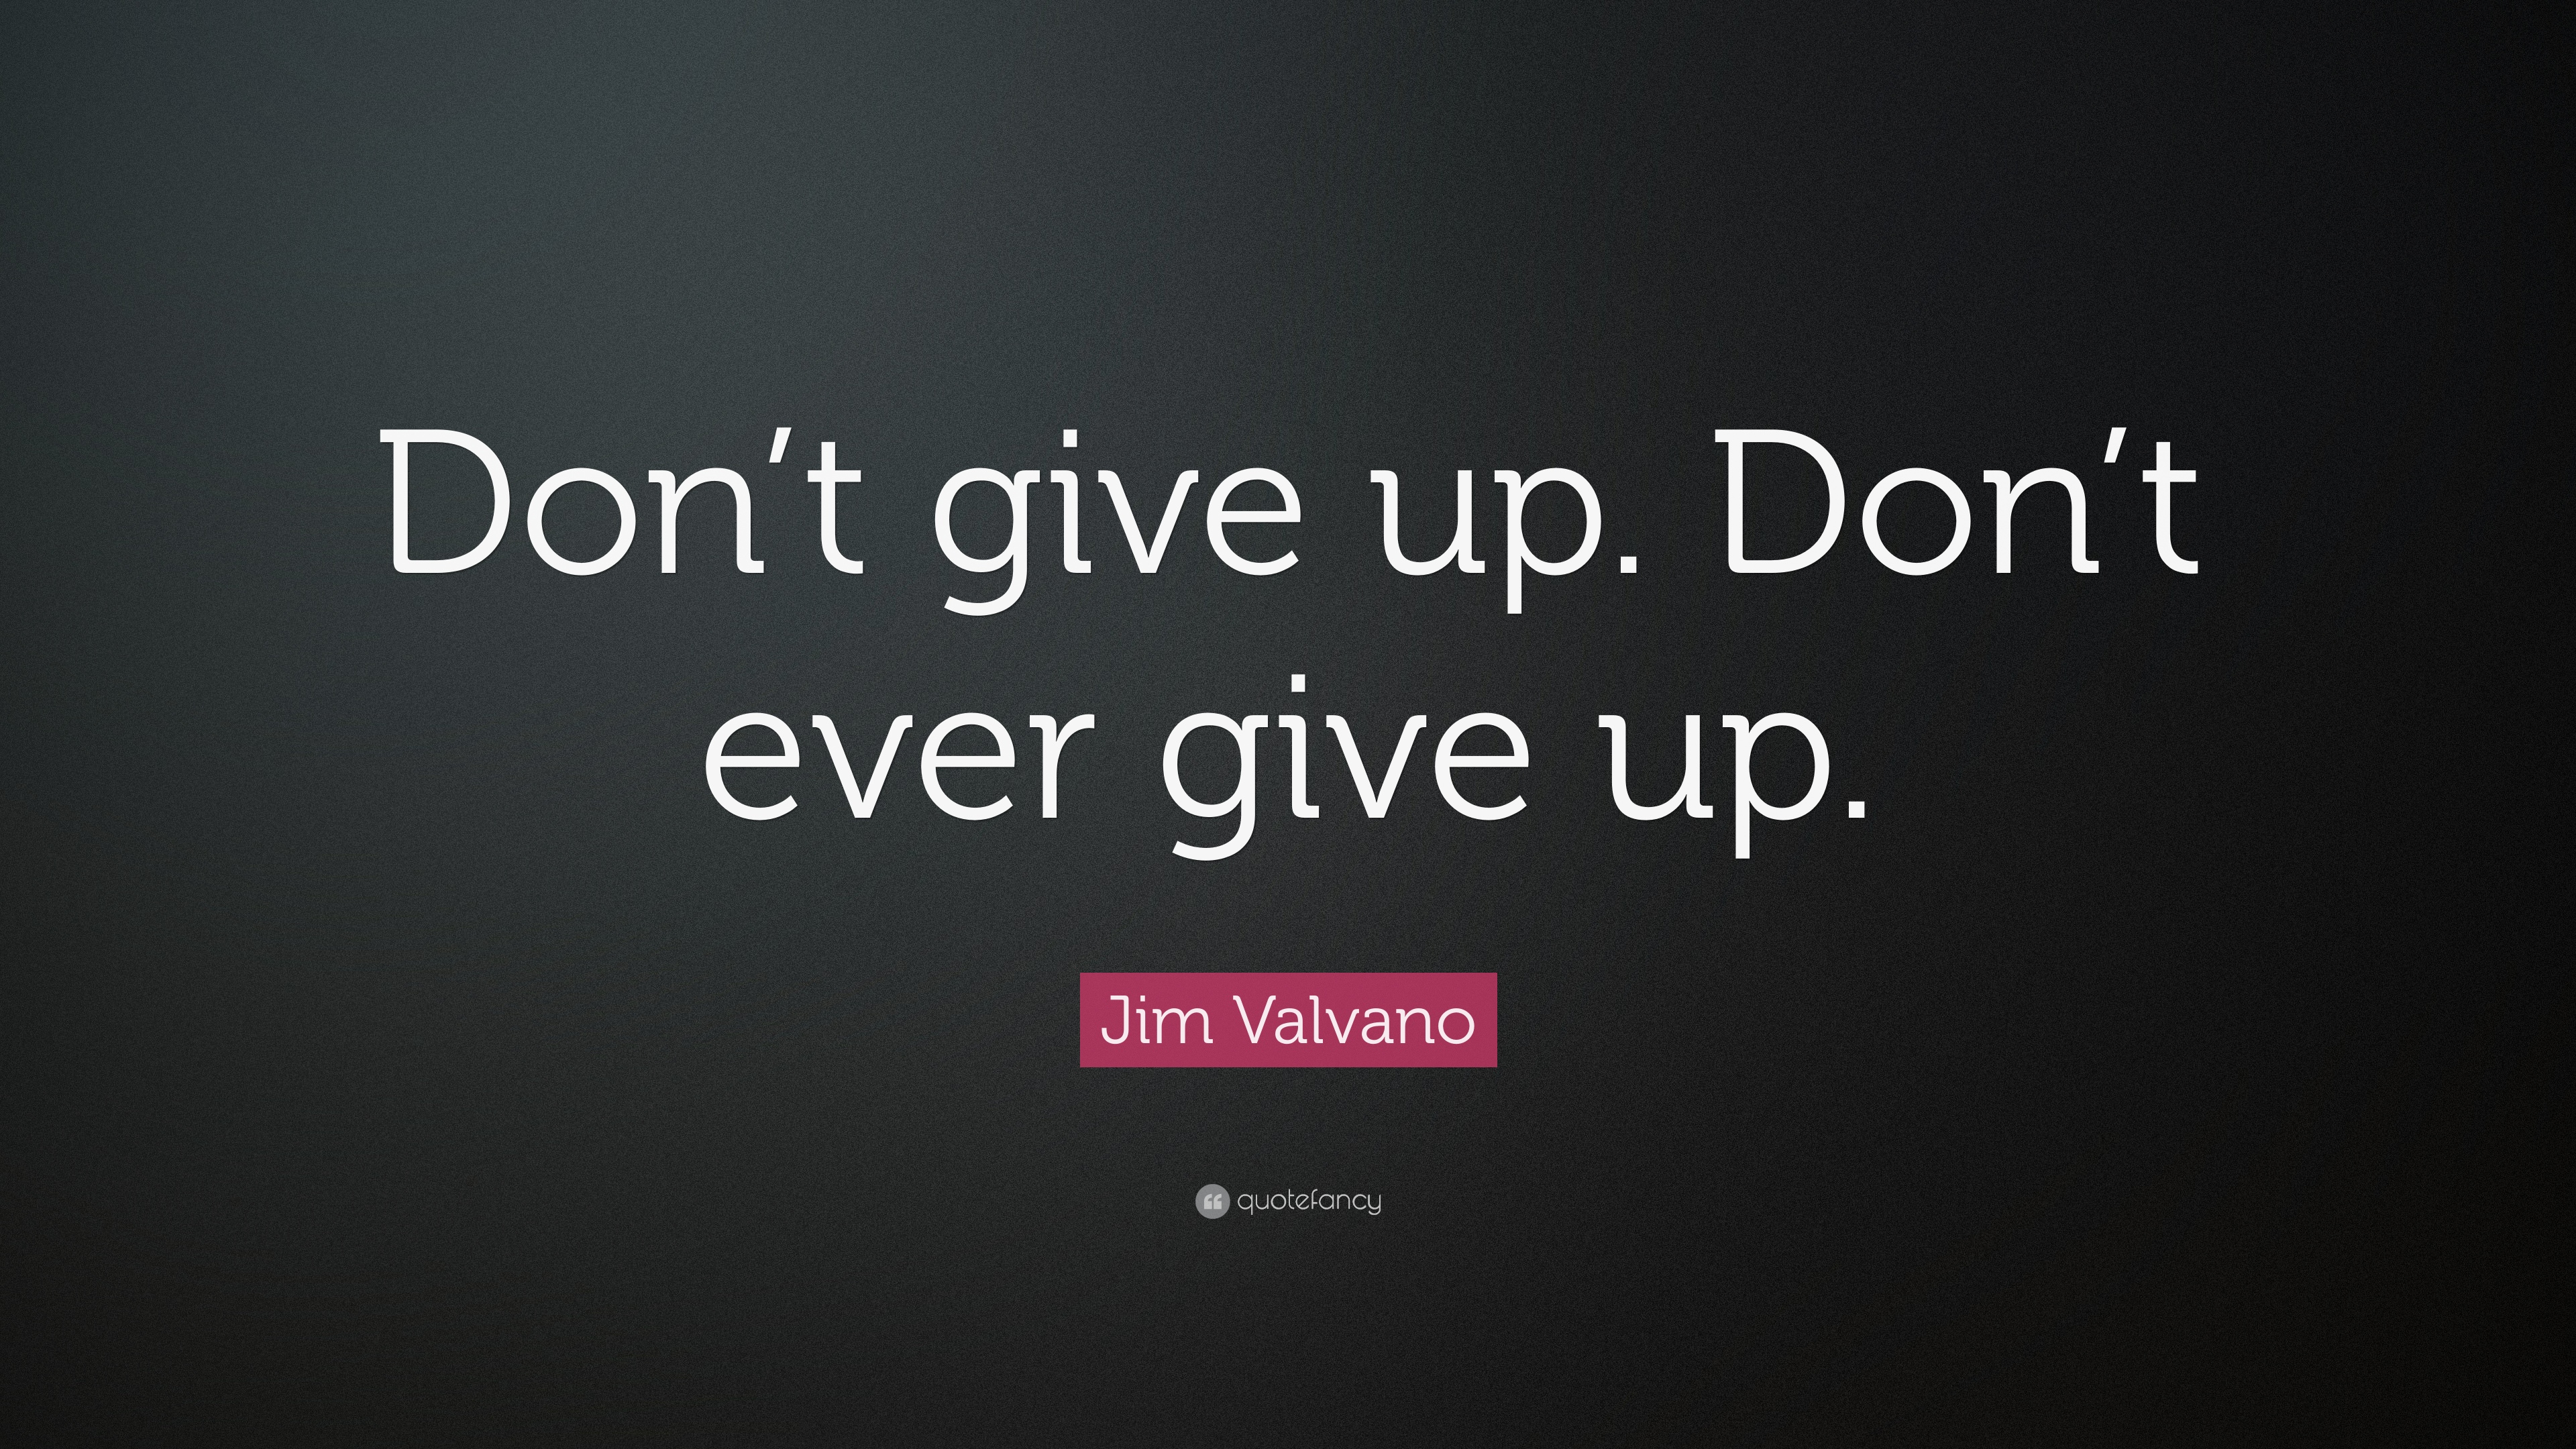 Jim Valvano Quote Dont give up. Dont ever give up. 9